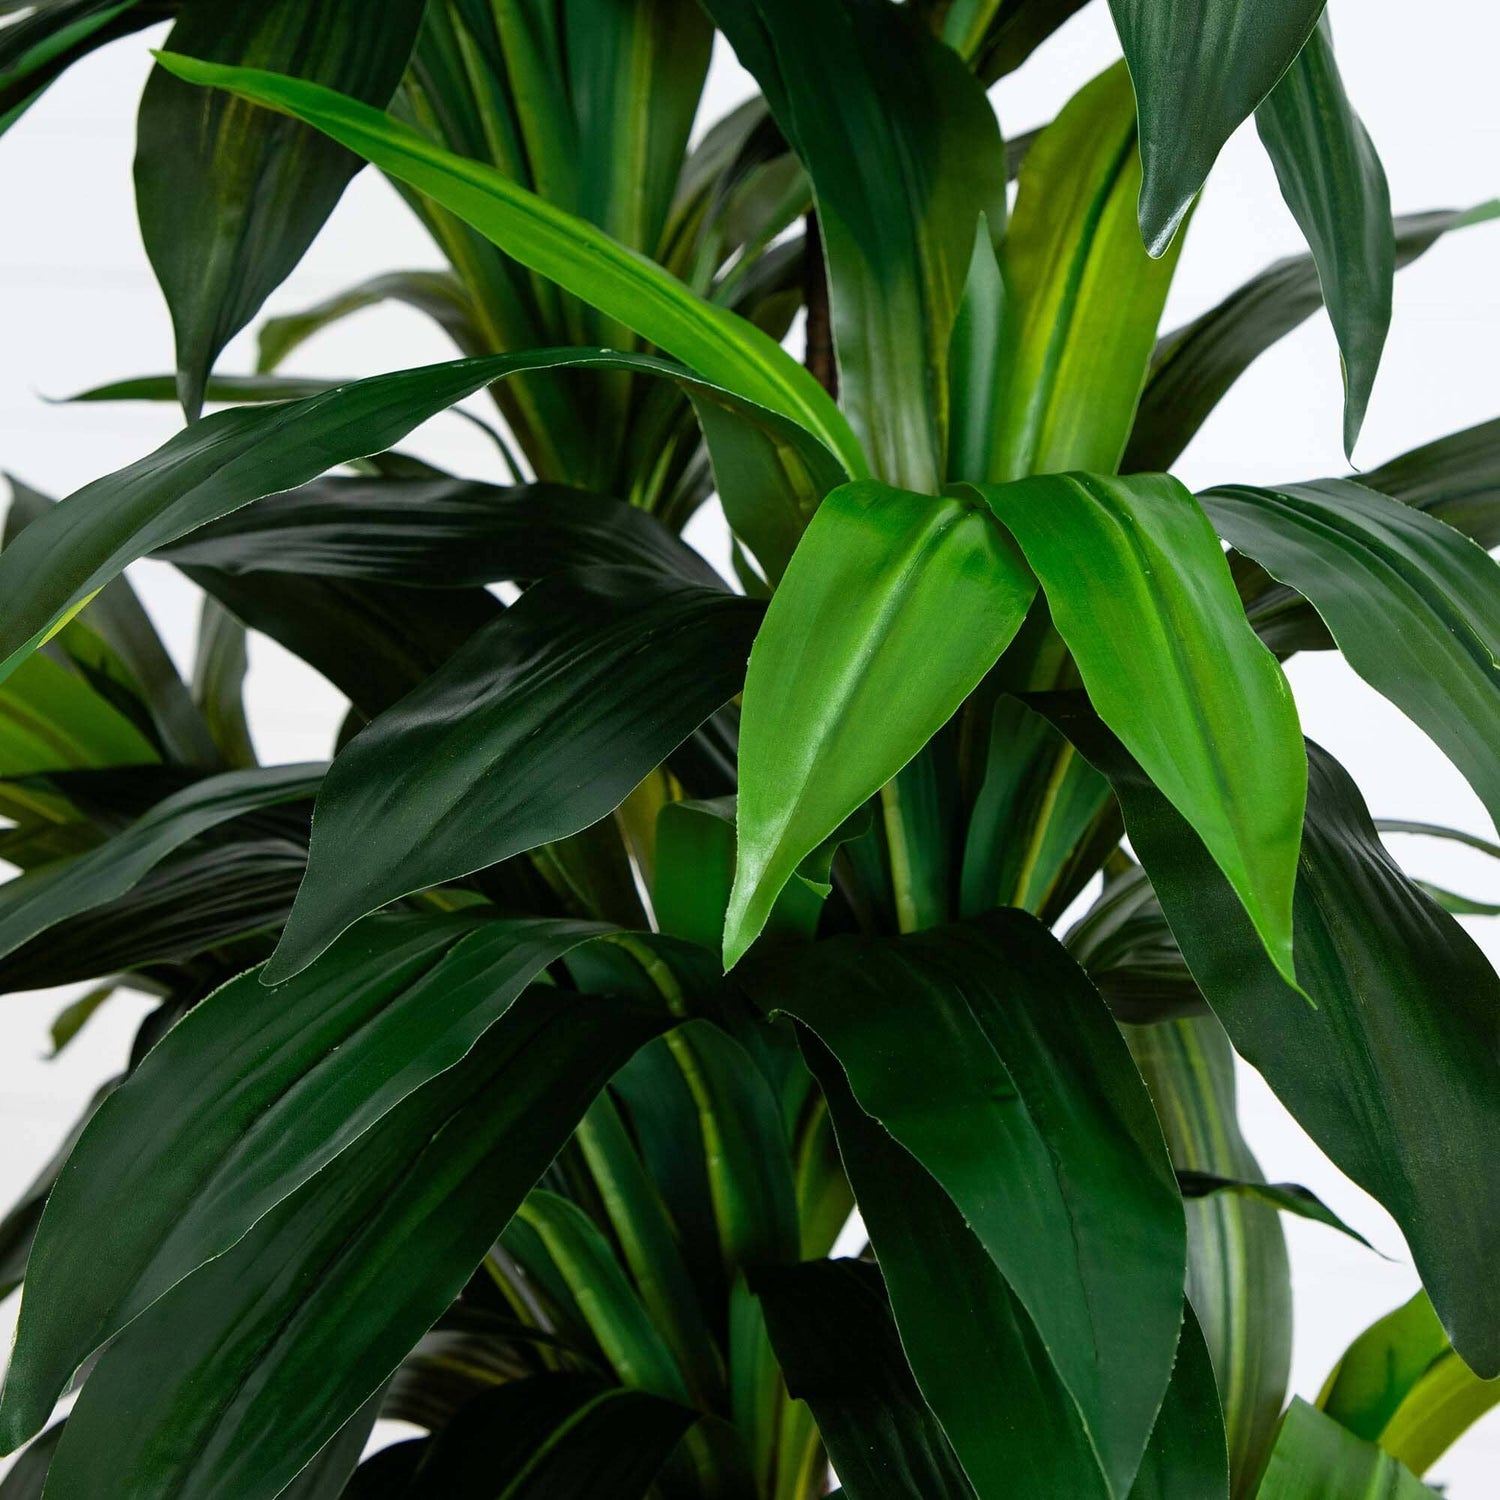 9’ Artificial Dracaena Tree with Real Touch Leaves